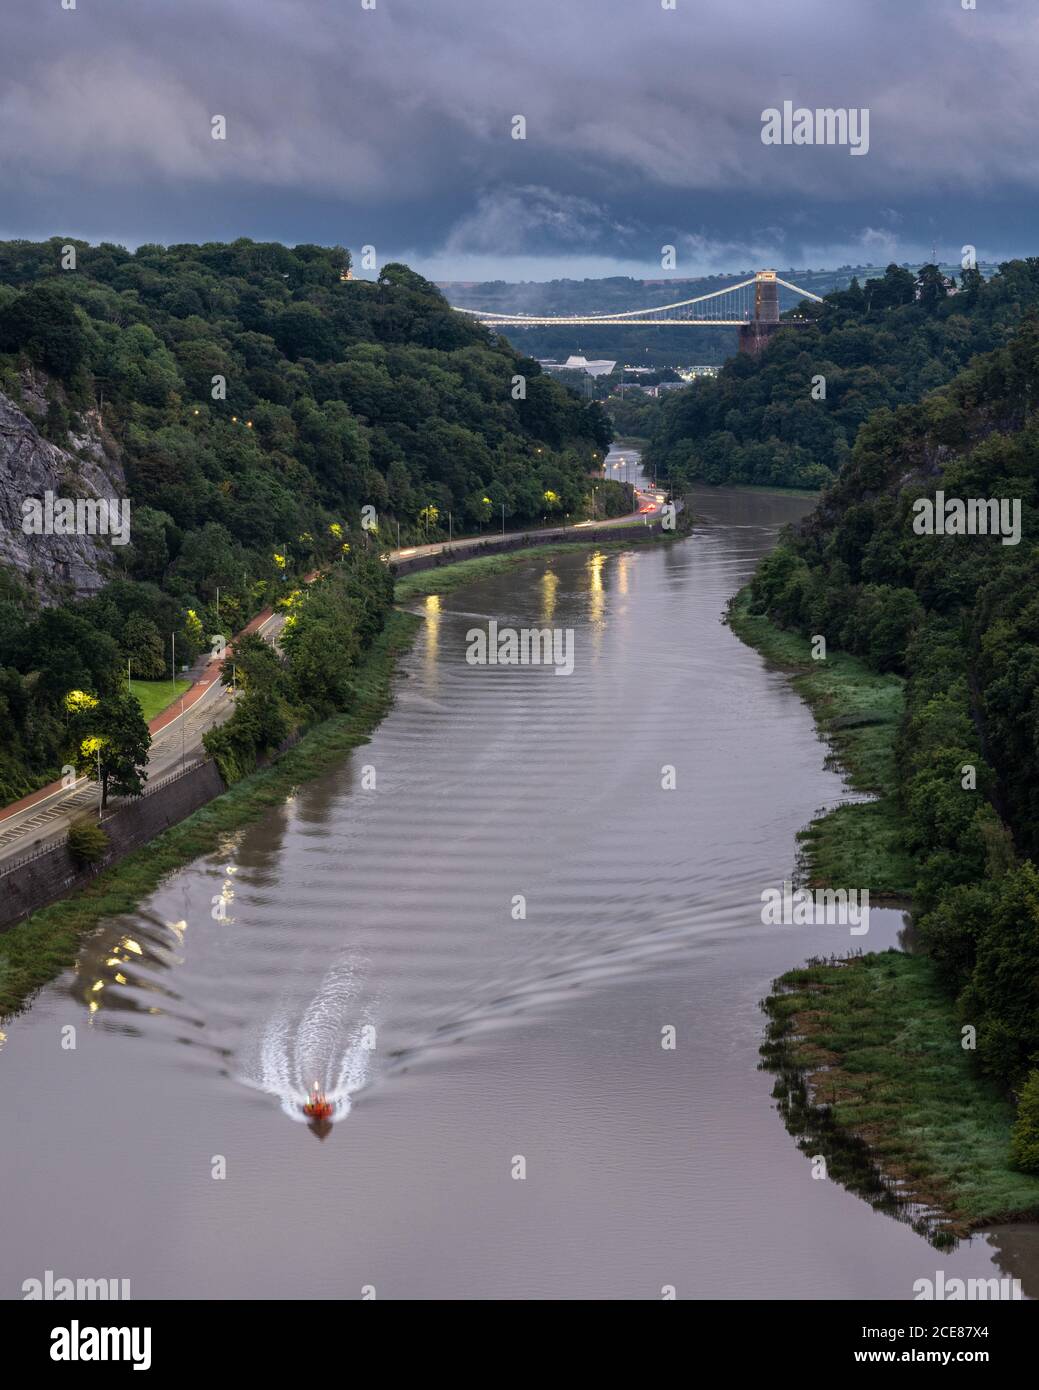 A boat travels down the River Avon estuary at high tide, under the iconic Clifton Suspension Bridge in Bristol's Avon Gorge. Stock Photo